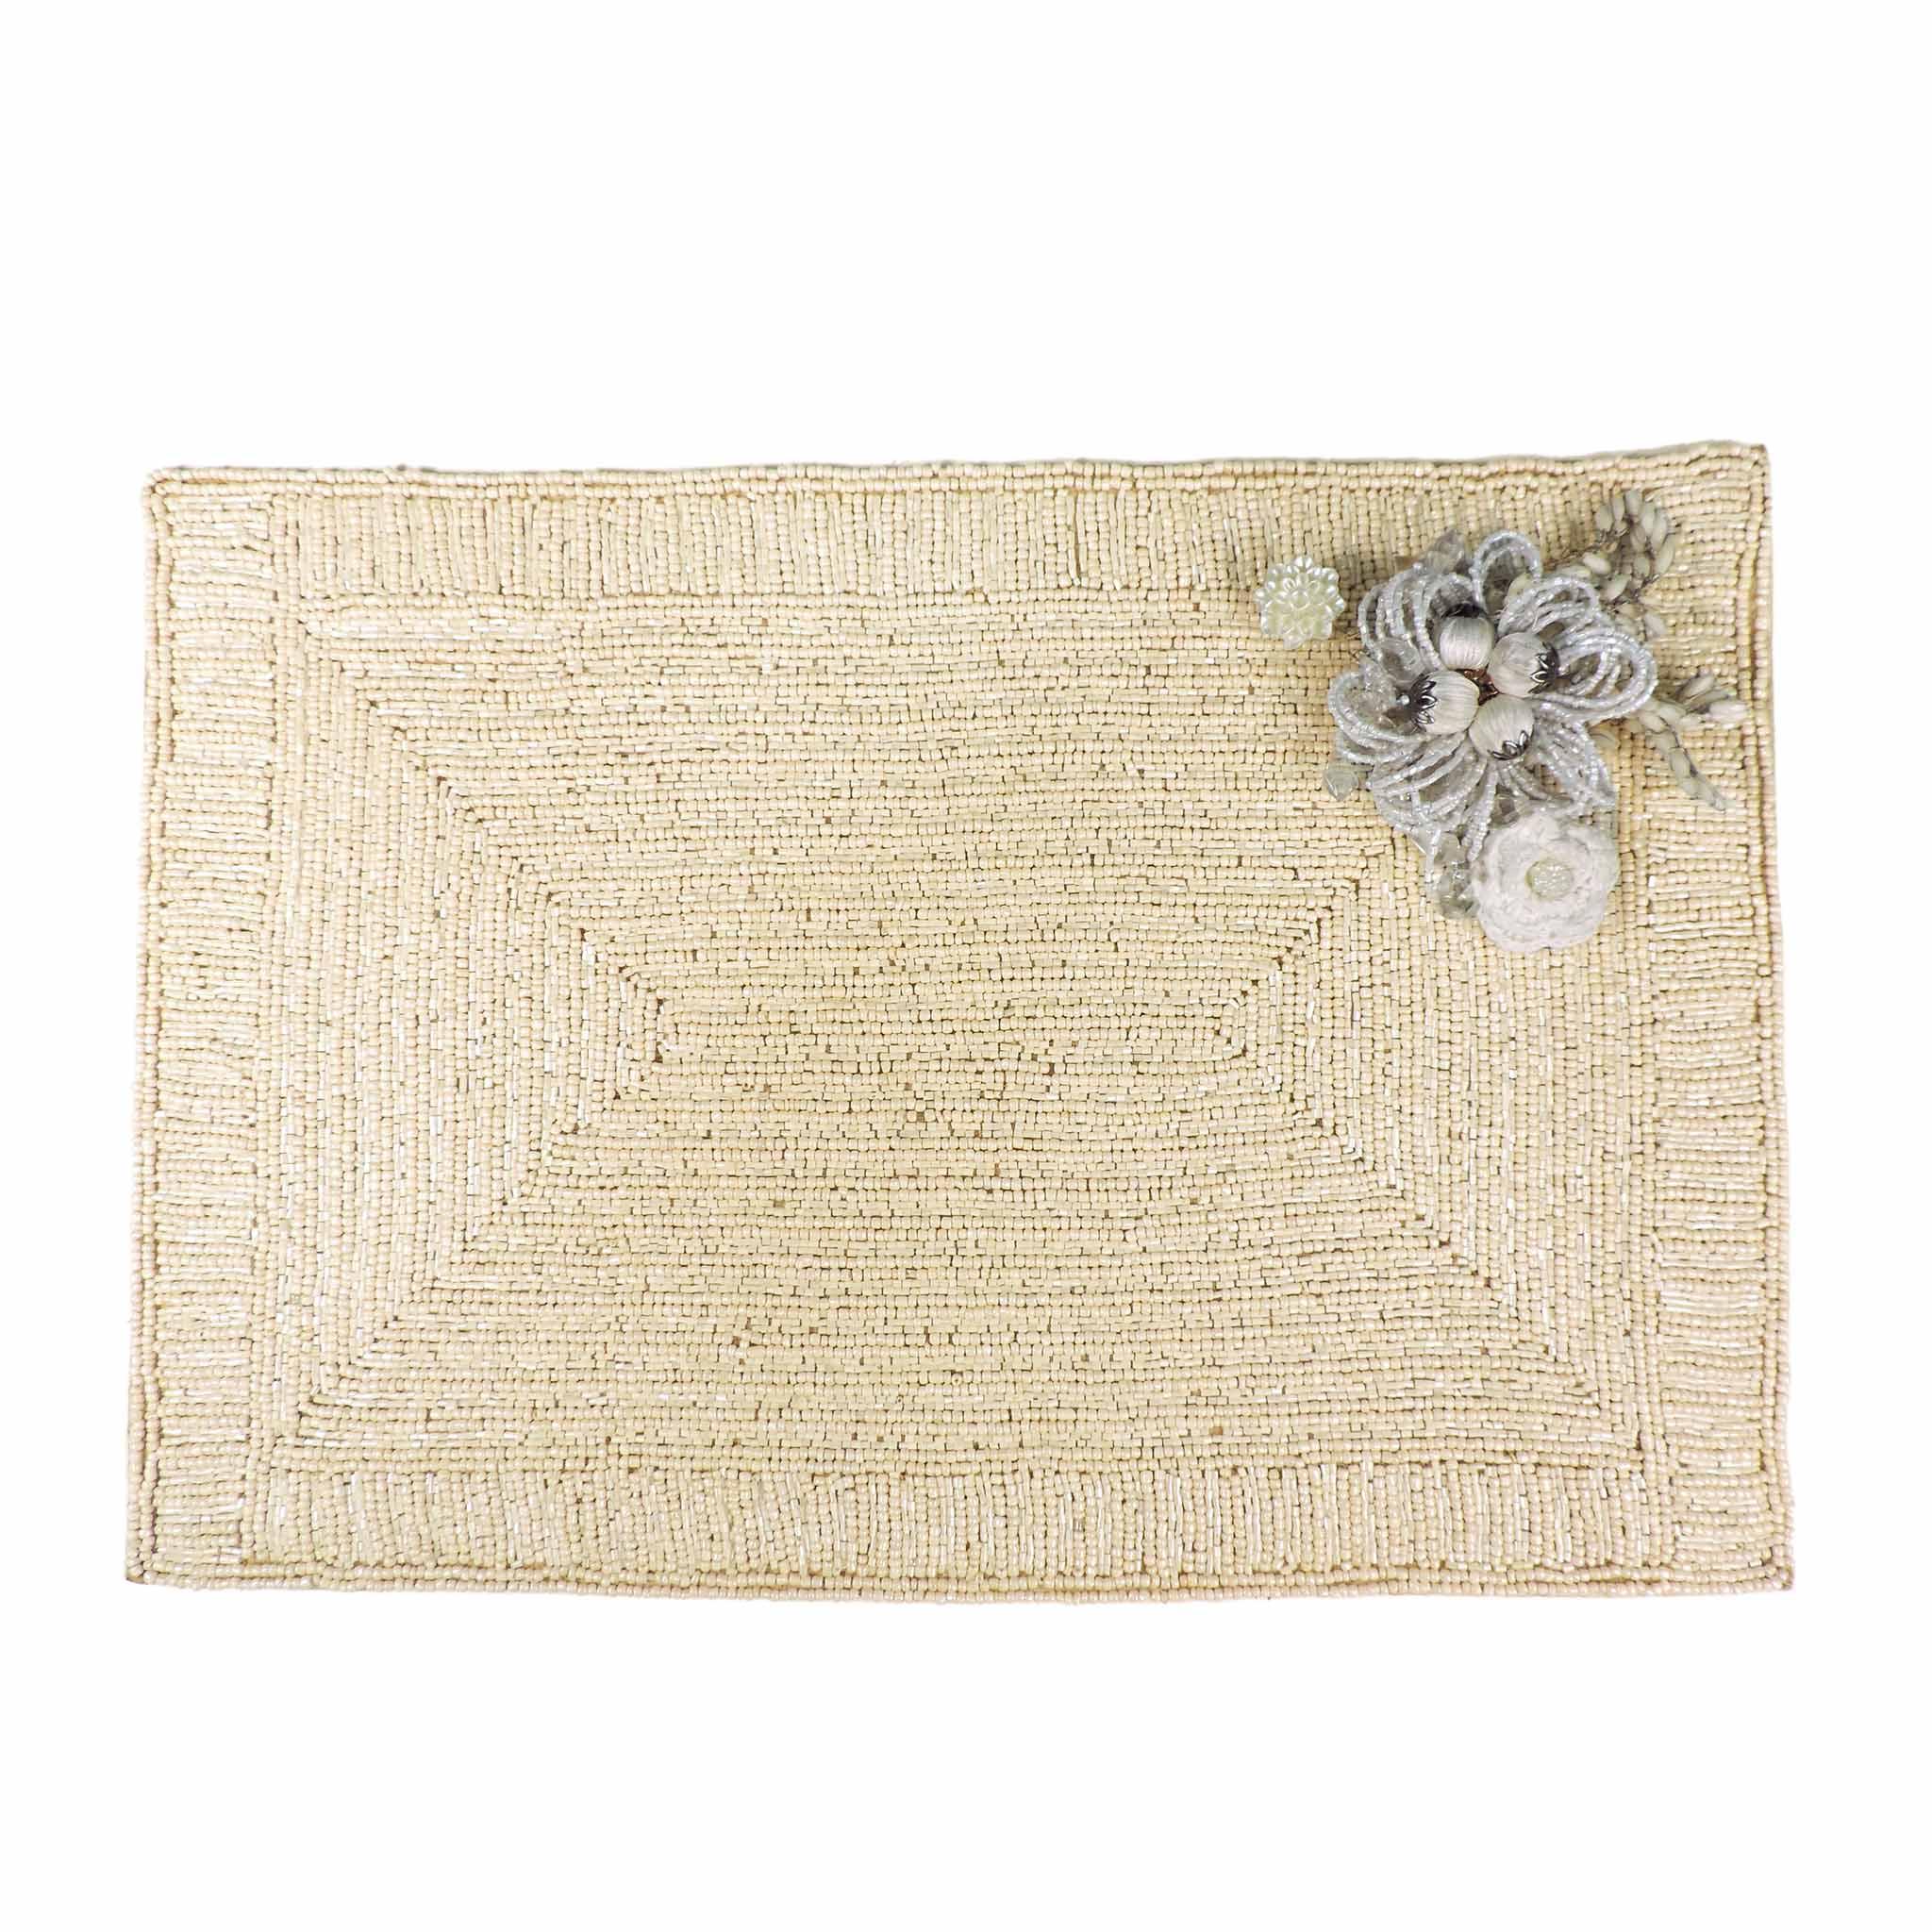 Glass Bead Embroidered Flower Placemat<br>Color: Cream<br>Set of 2<br>Size: 12"x18" - Trunkin' USA